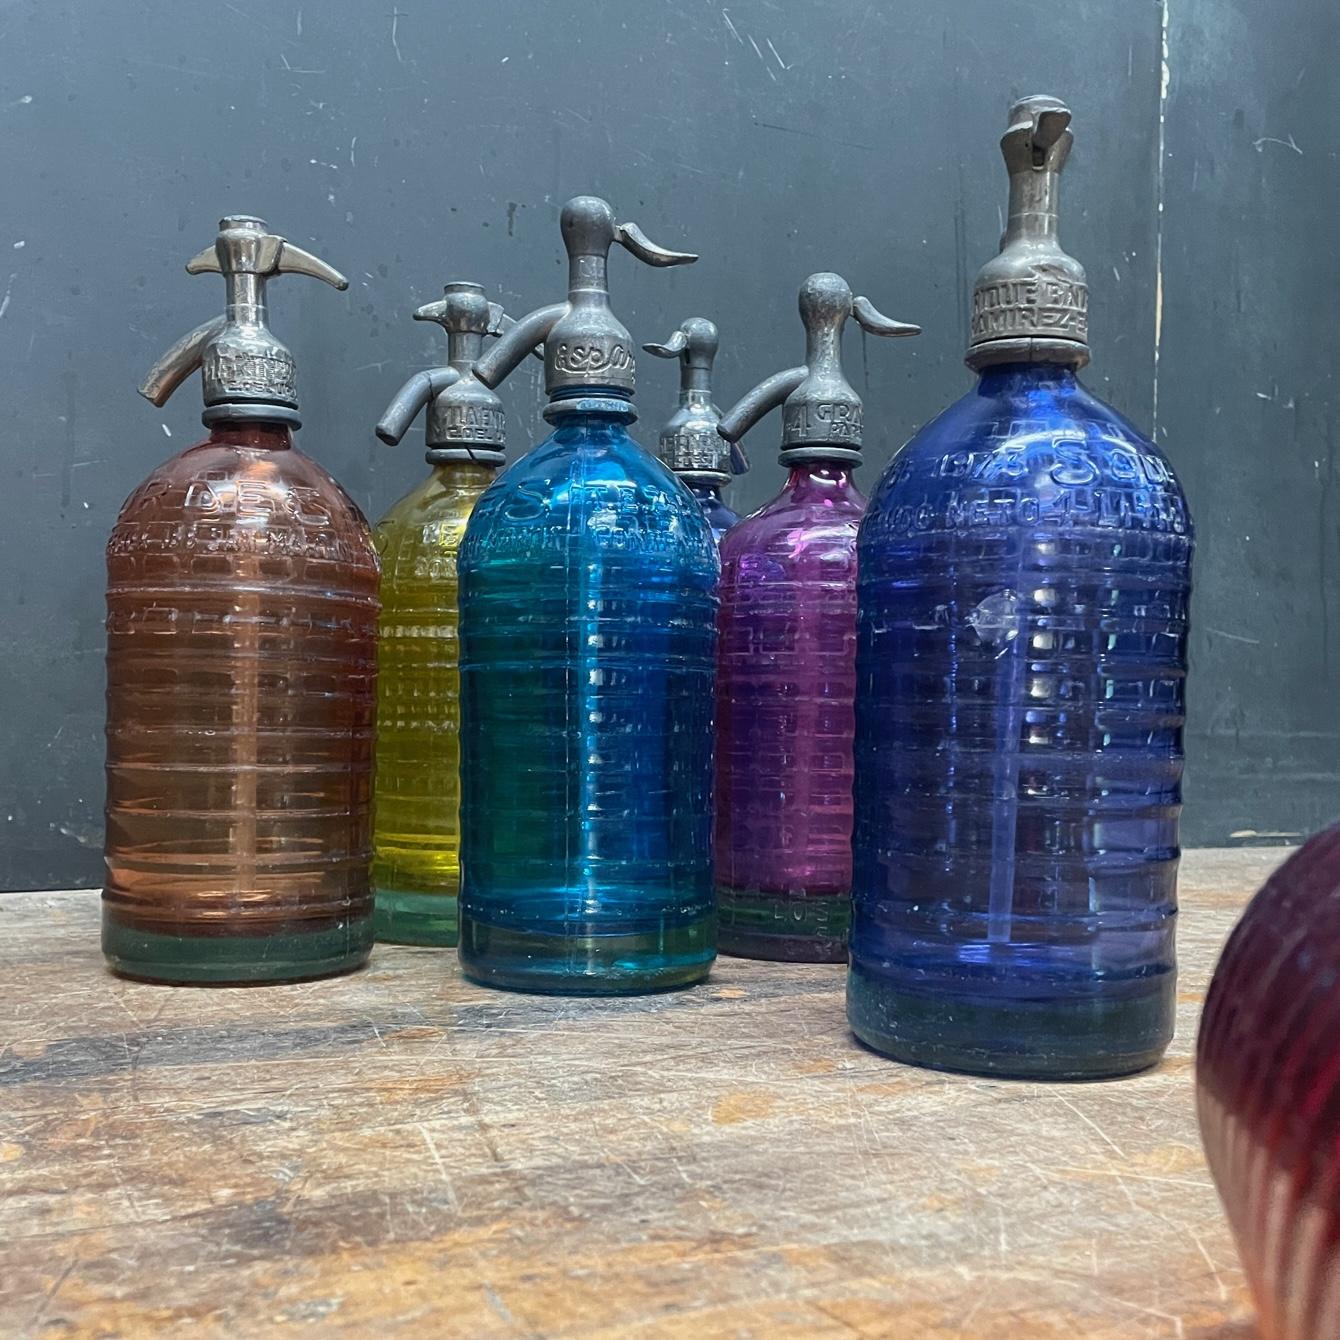 A beautiful very old Lourdes Argentinian seltzer bottle collection. Very colorful, even with a pink one, which is a color we have never seen. These are Sold as Non-Function for decoration.